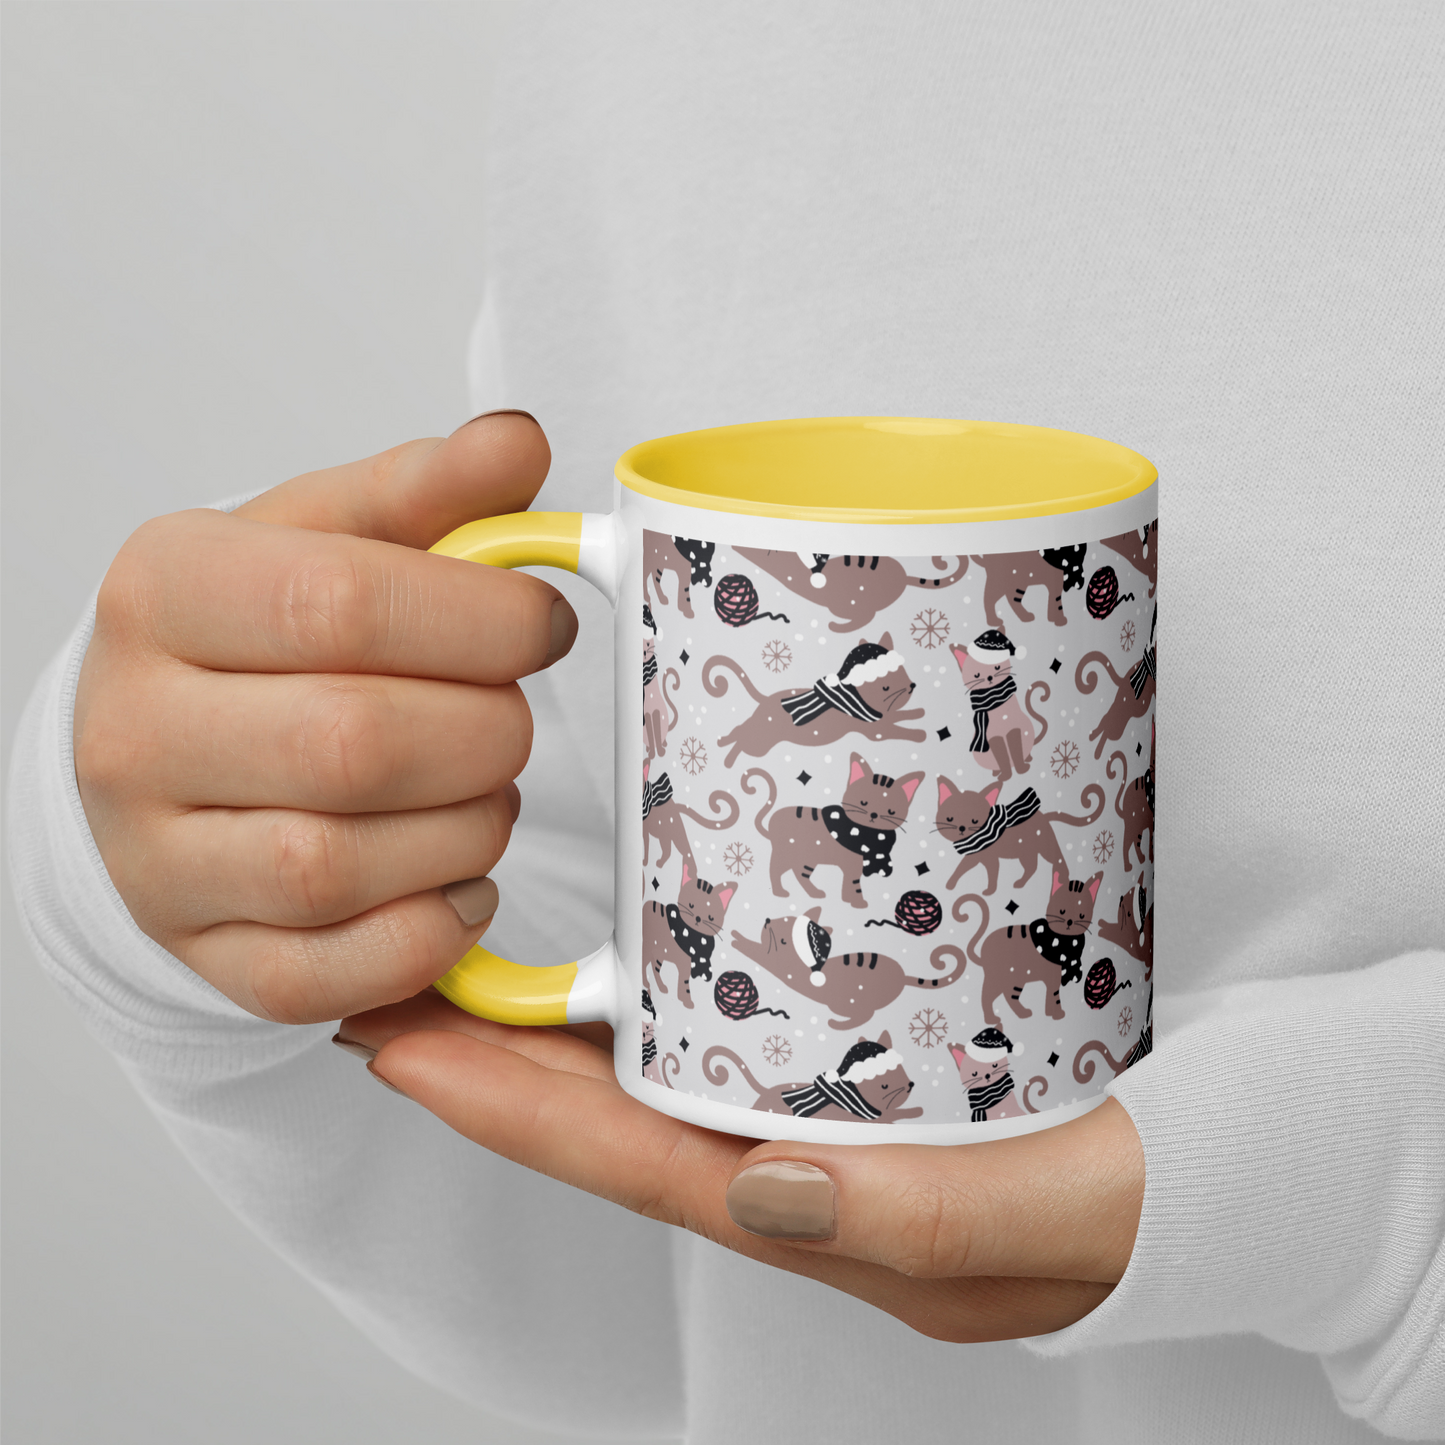 Winter Christmas Cat | Seamless Patterns | White Ceramic Mug with Color Inside - #1